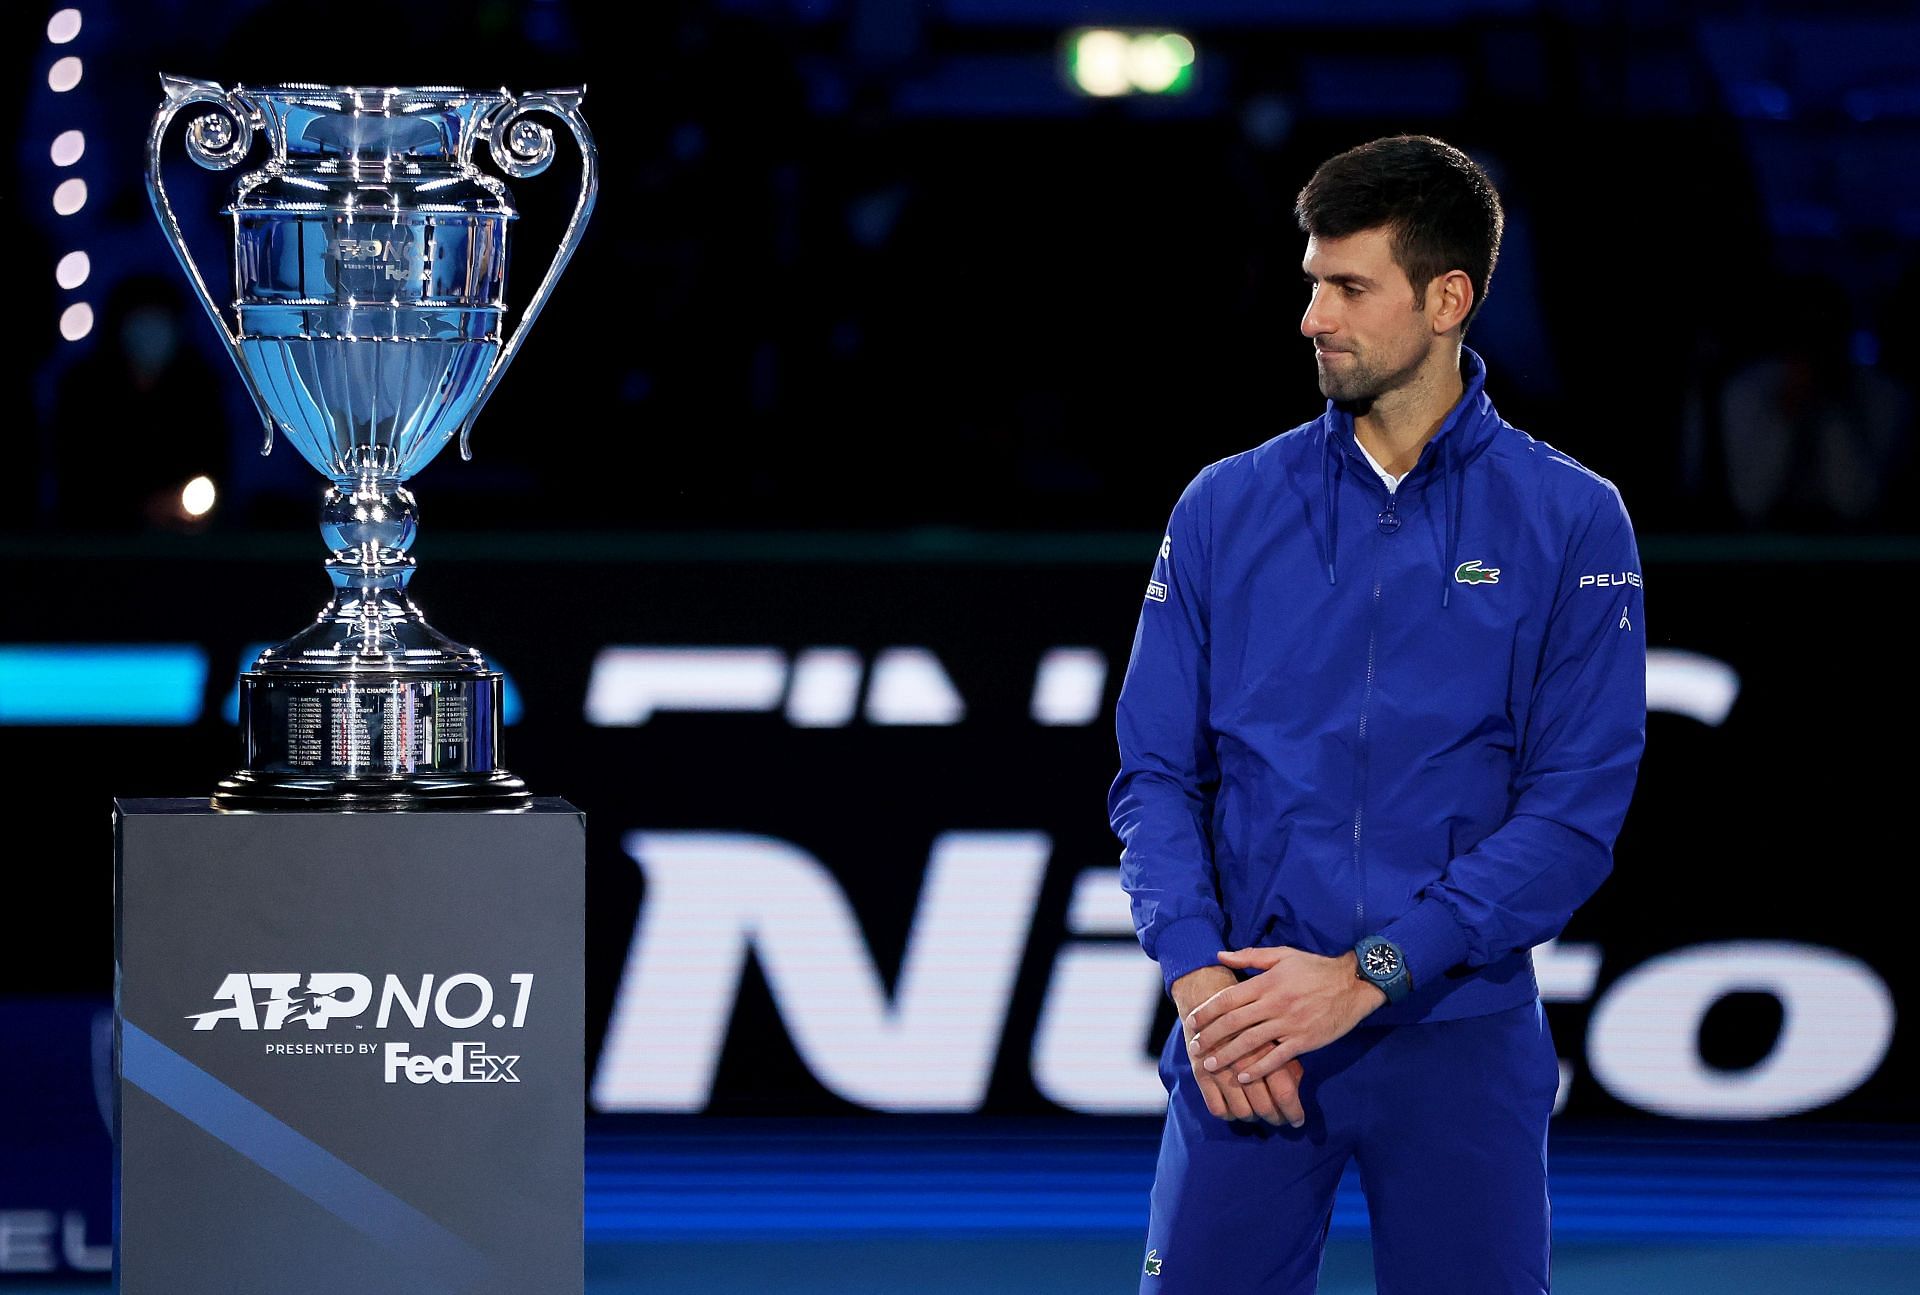 Novak Djokovic with his 7th year-end World No. 1 trophy